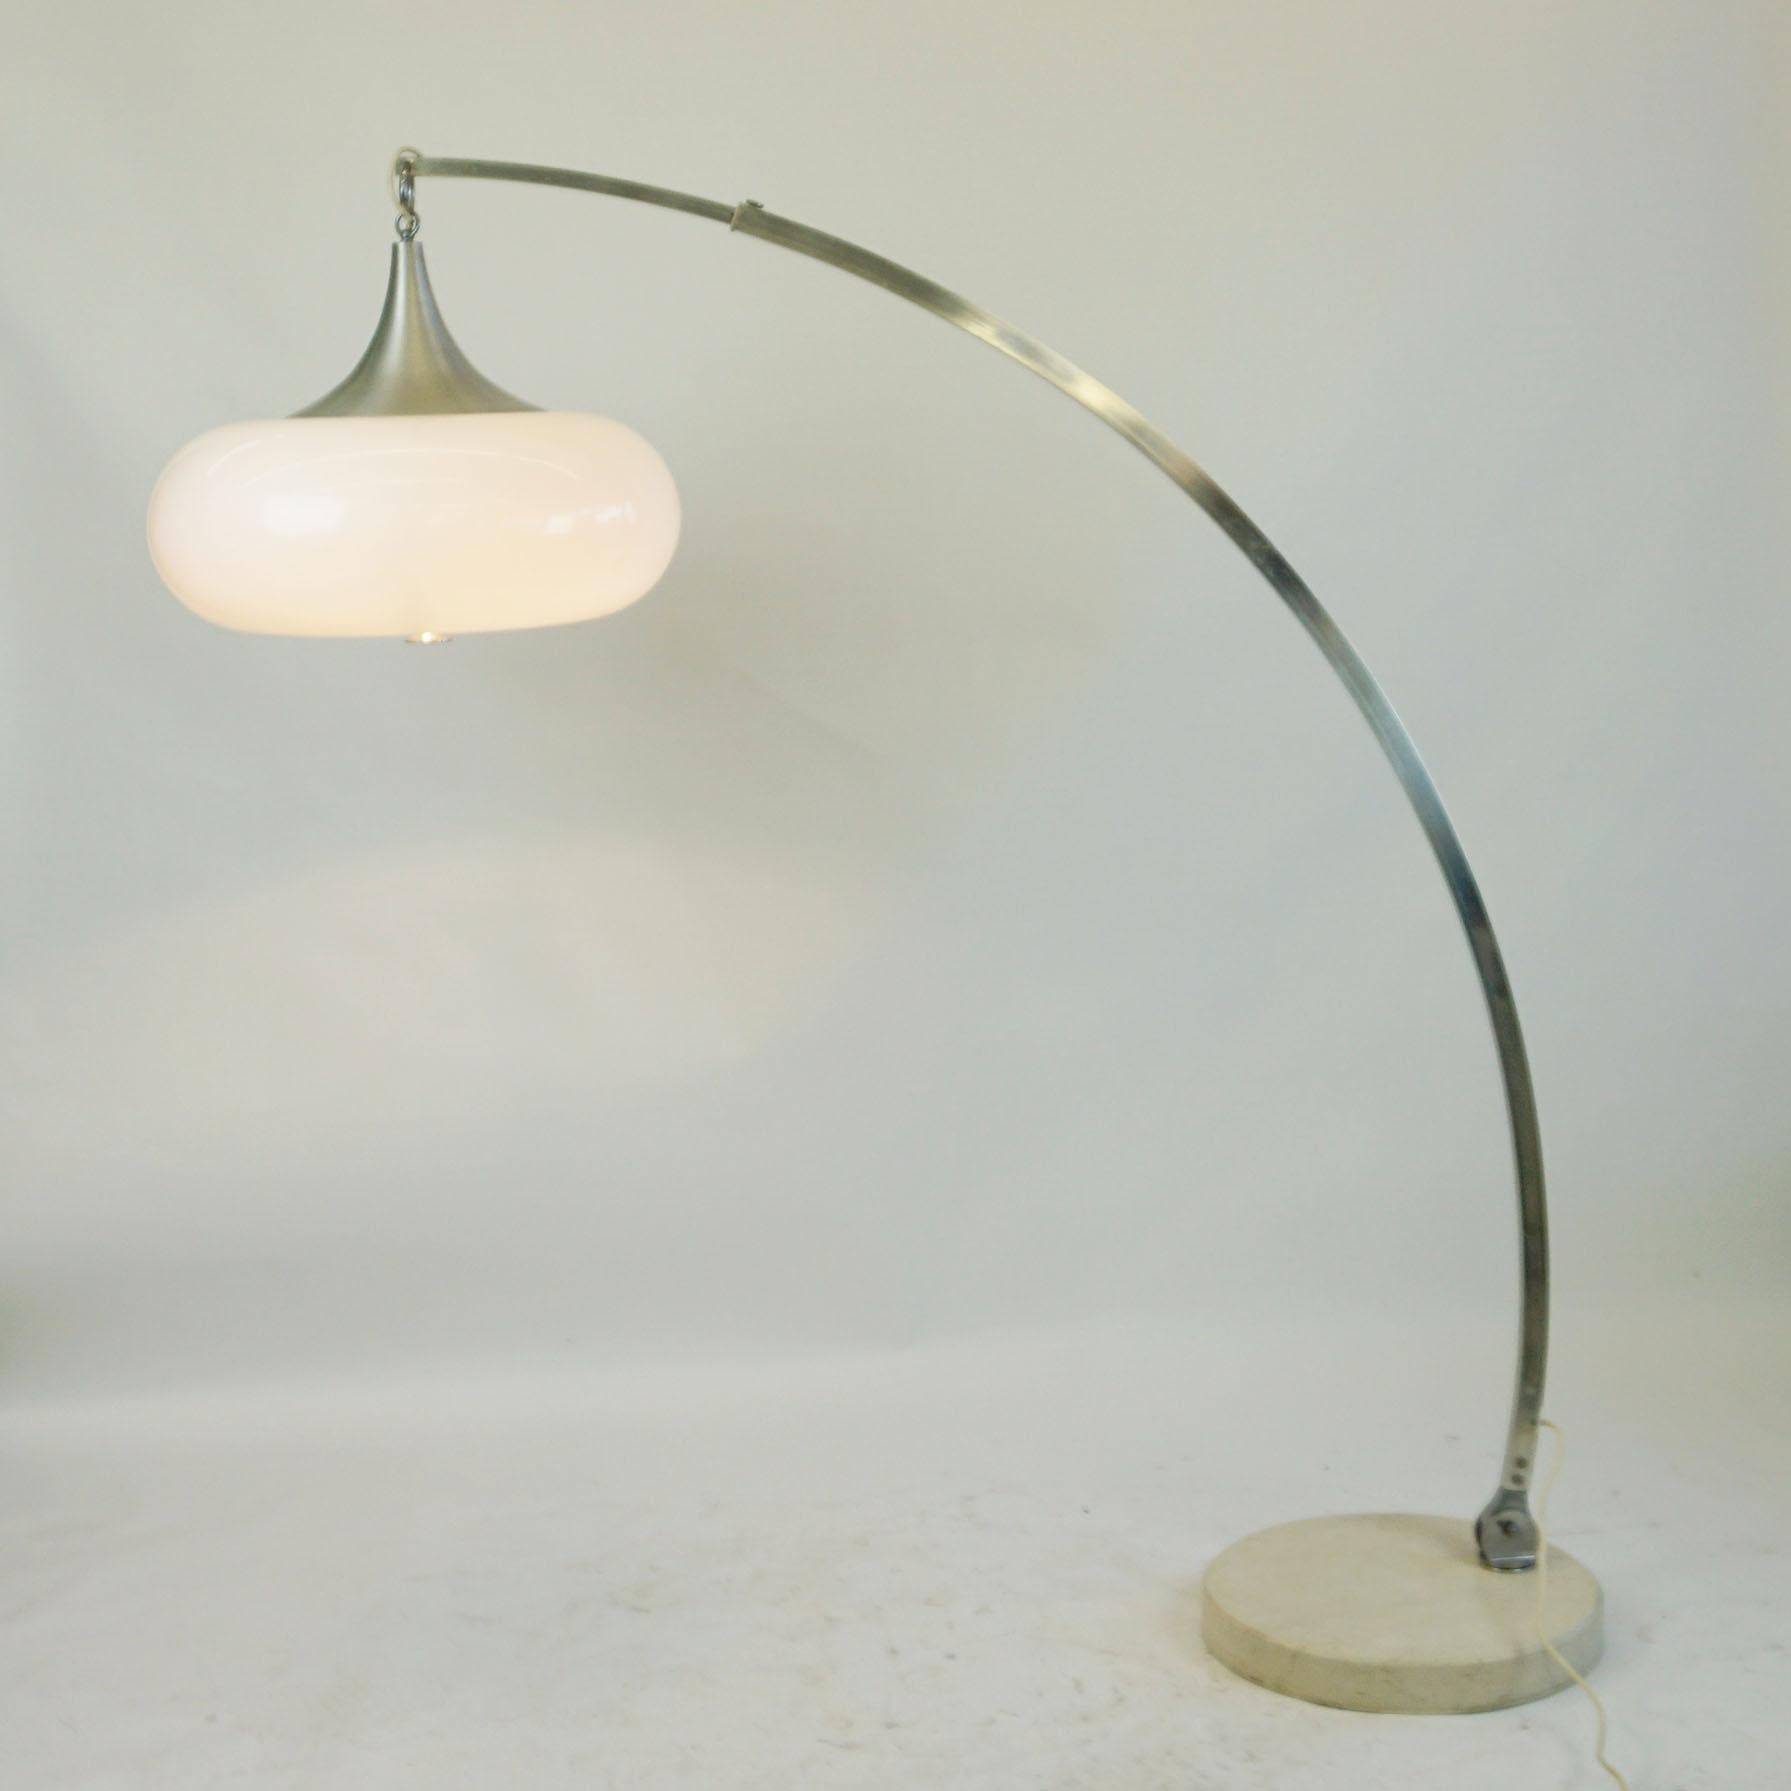 This amazing very large Italian arc floor lamp was designed and produced in Italy in 1960s, its Design is very close to lamps by Guzzini or Reggiani. 
This lamp features a chromed metal structure with circular marble base and a large white plastic